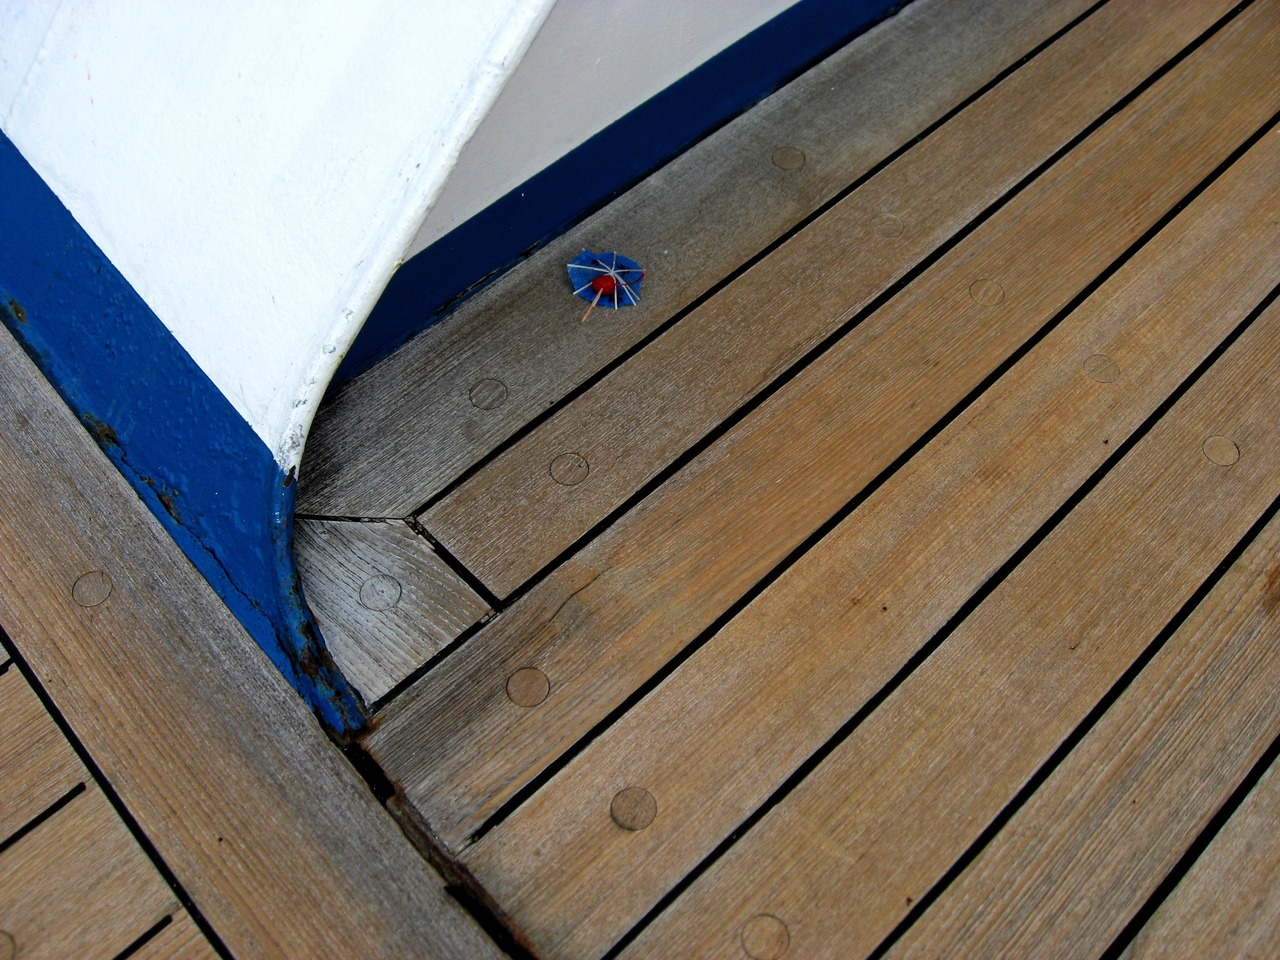 Paradise Lost: discarded cocktail cherry and umbrella on the deck in the entryway to the Deck 11 forward lookout above the bridge on Carnival Sensation.